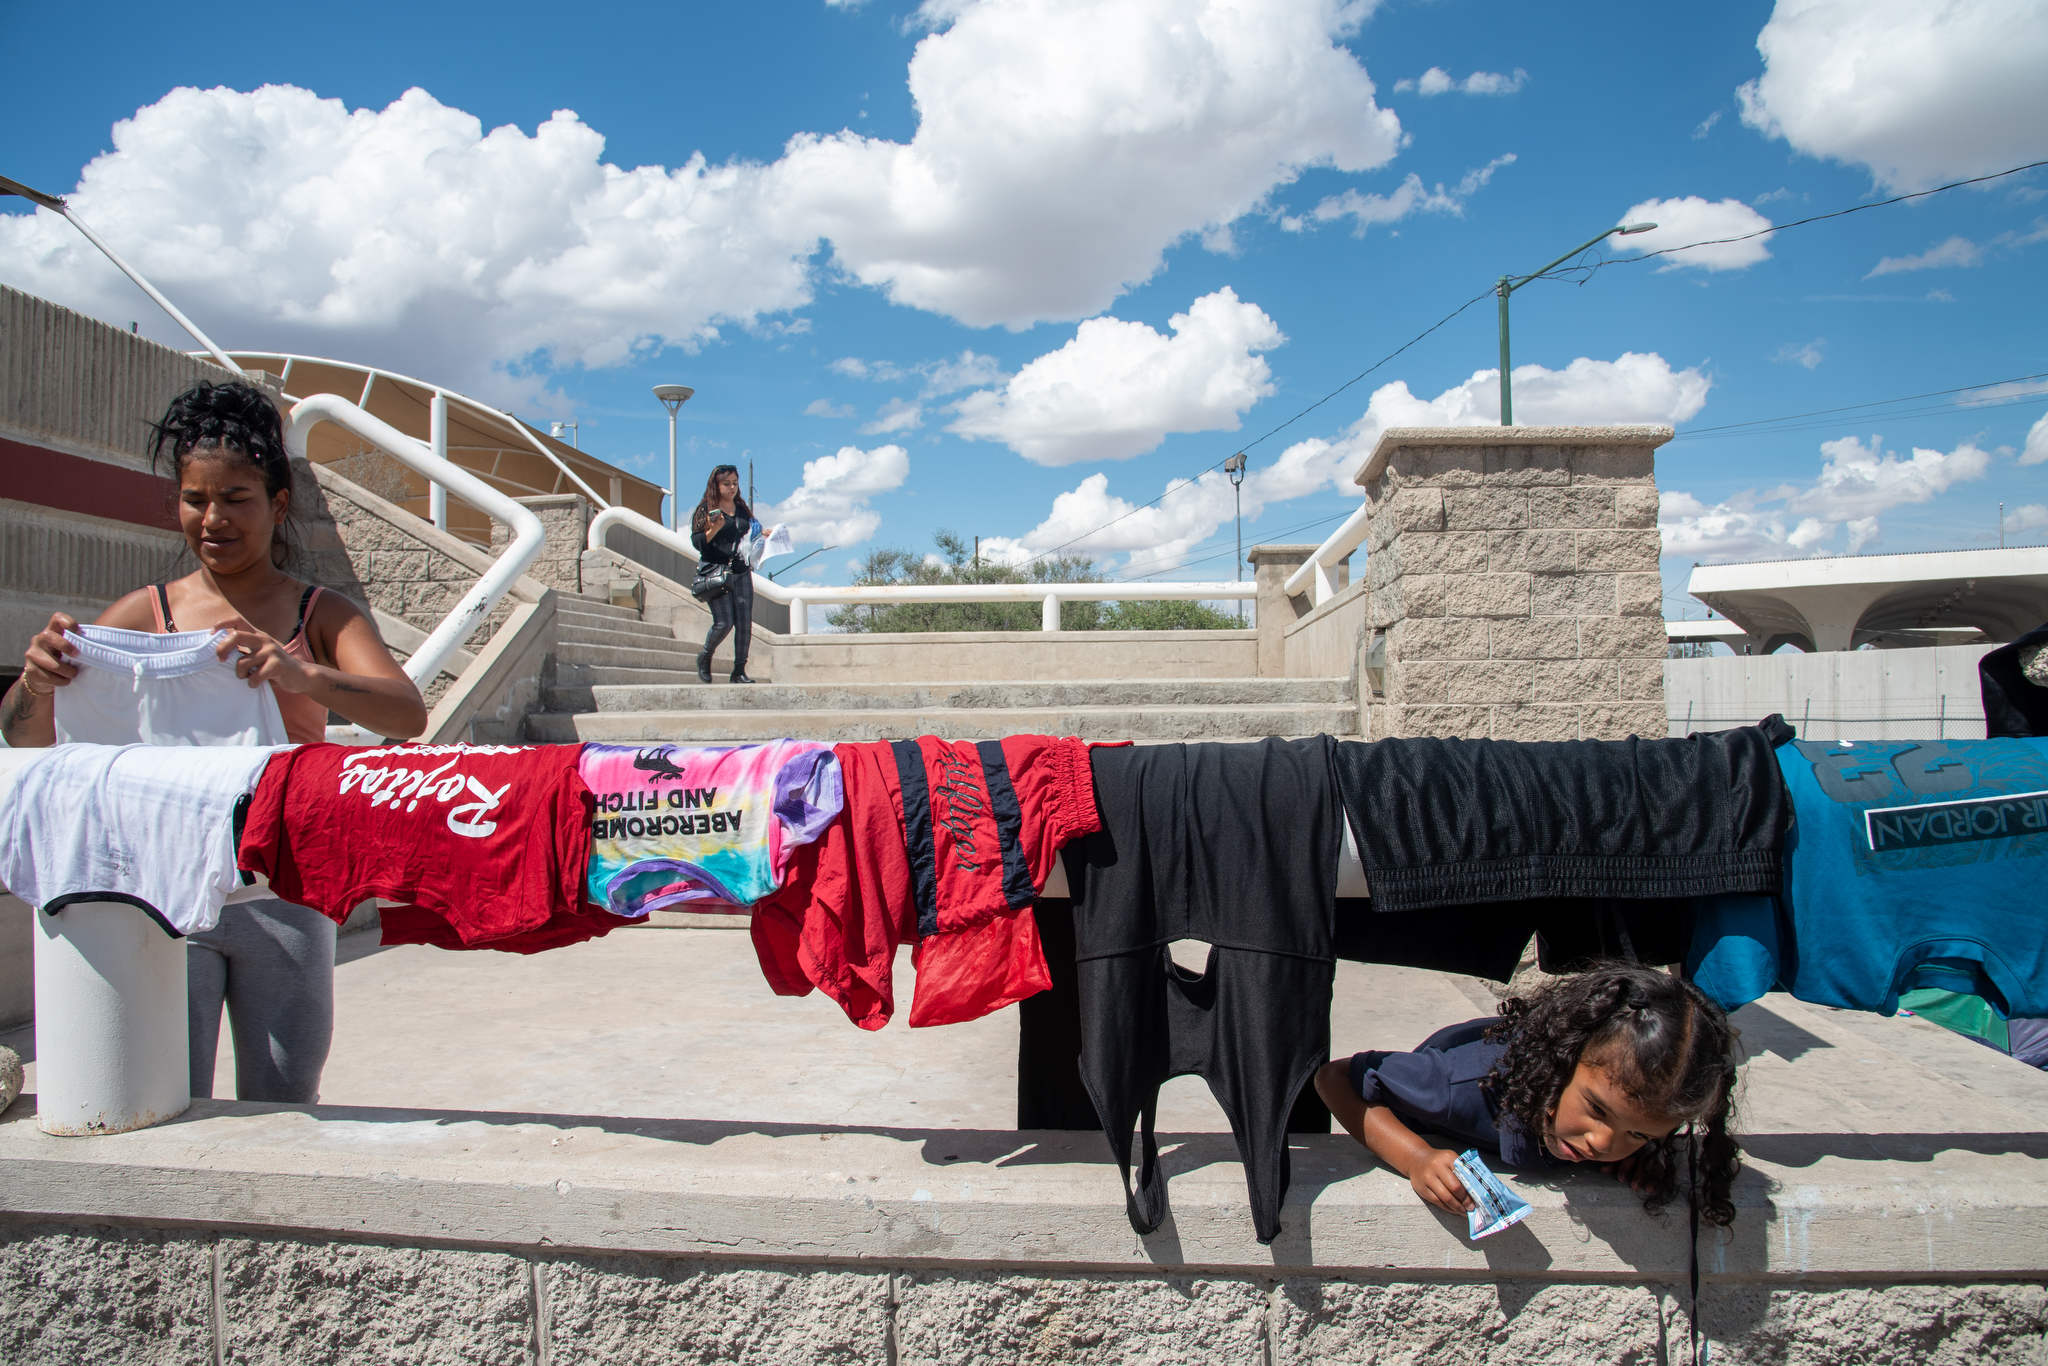 T-shirts and other clothing hang on a metal railing of a municipal building, under a partly cloudy sky. The daughter is playfully looking under the railing while holding a snack.